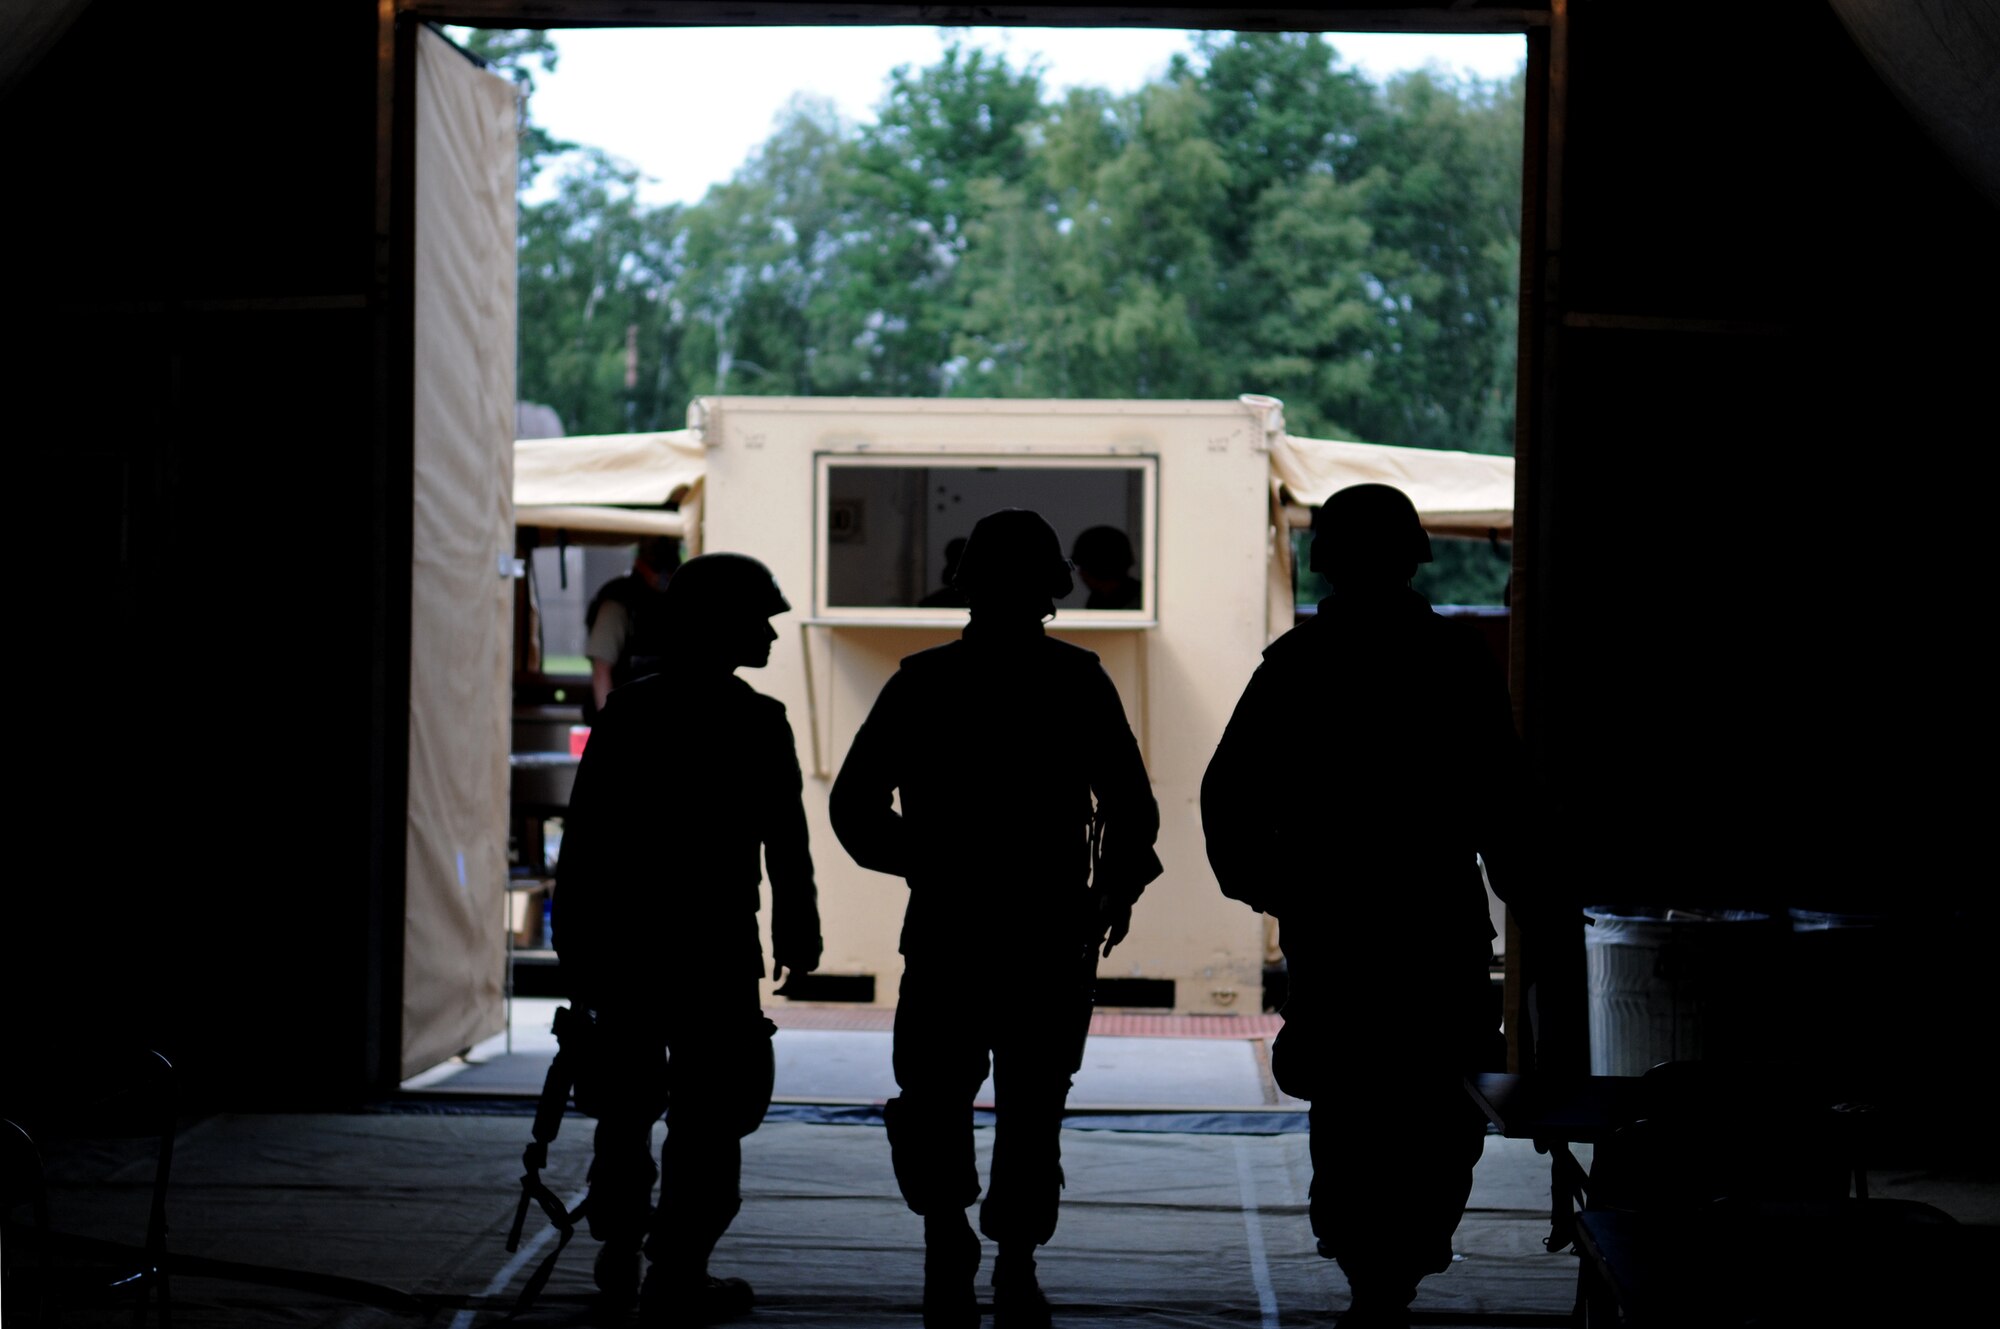 U.S. Air Force Airmen of different bases, wings, and squadrons head out the tent after eating chow to continue the mission during the Silver Flag exercise on Ramstein Air Base, Germany, Aug. 1, 2009. There are about nine to ten Silver Flag exercises held throughout the year at the Construction Training Squadron, and the average class size is 100 to 200 people. (U.S. Air Force photo by Airman 1st Class Grovert Fuentes-Contreras)(Released)